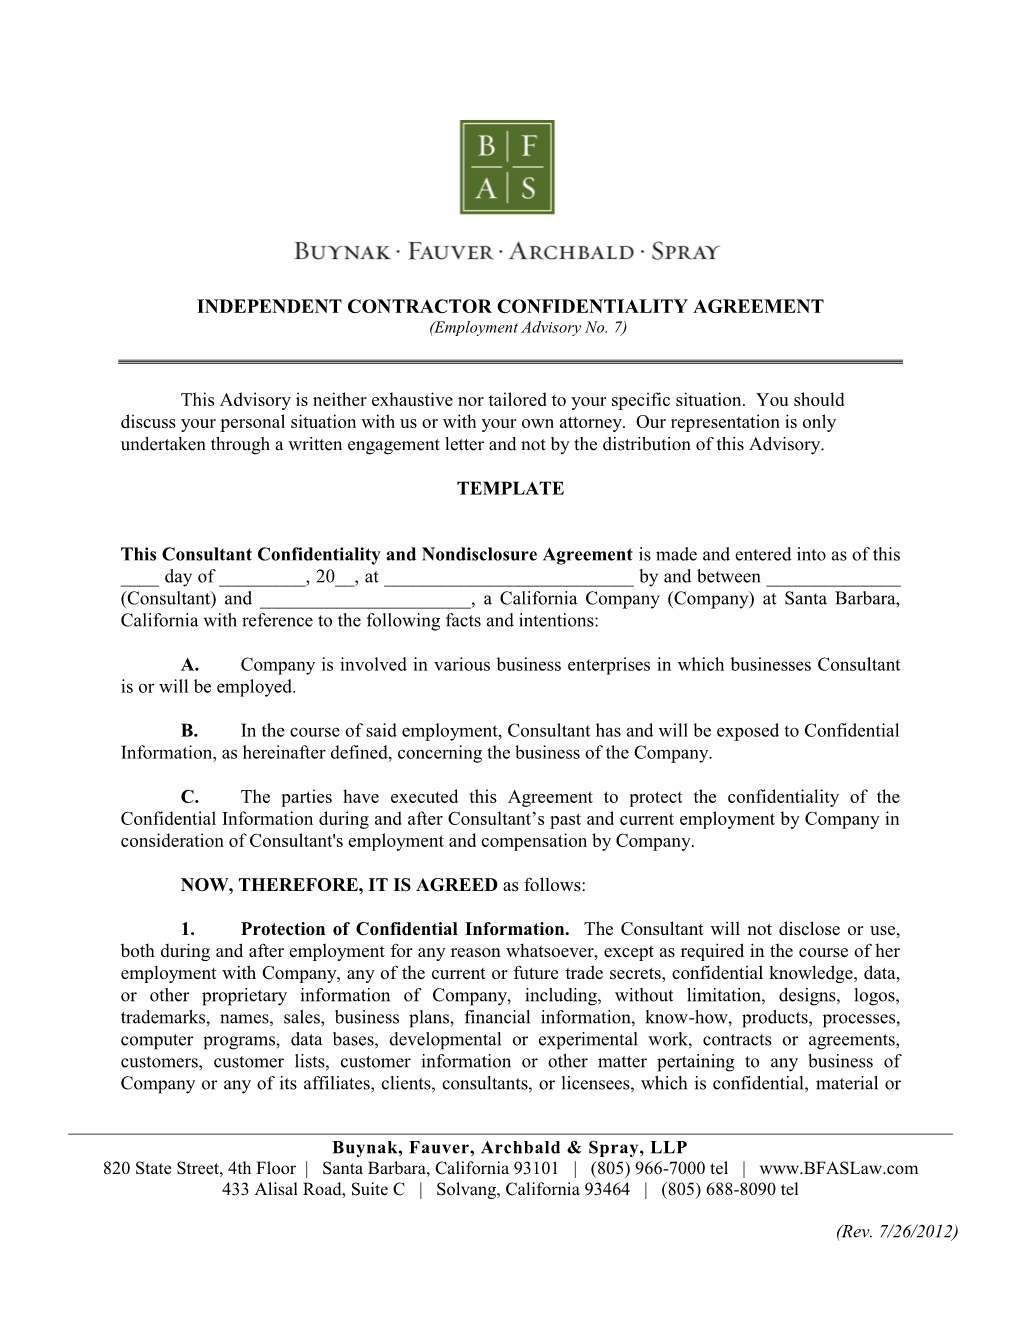 INDEPENDENT CONTRACTOR CONFIDENTIALITY AGREEMENT (Employment Advisory No